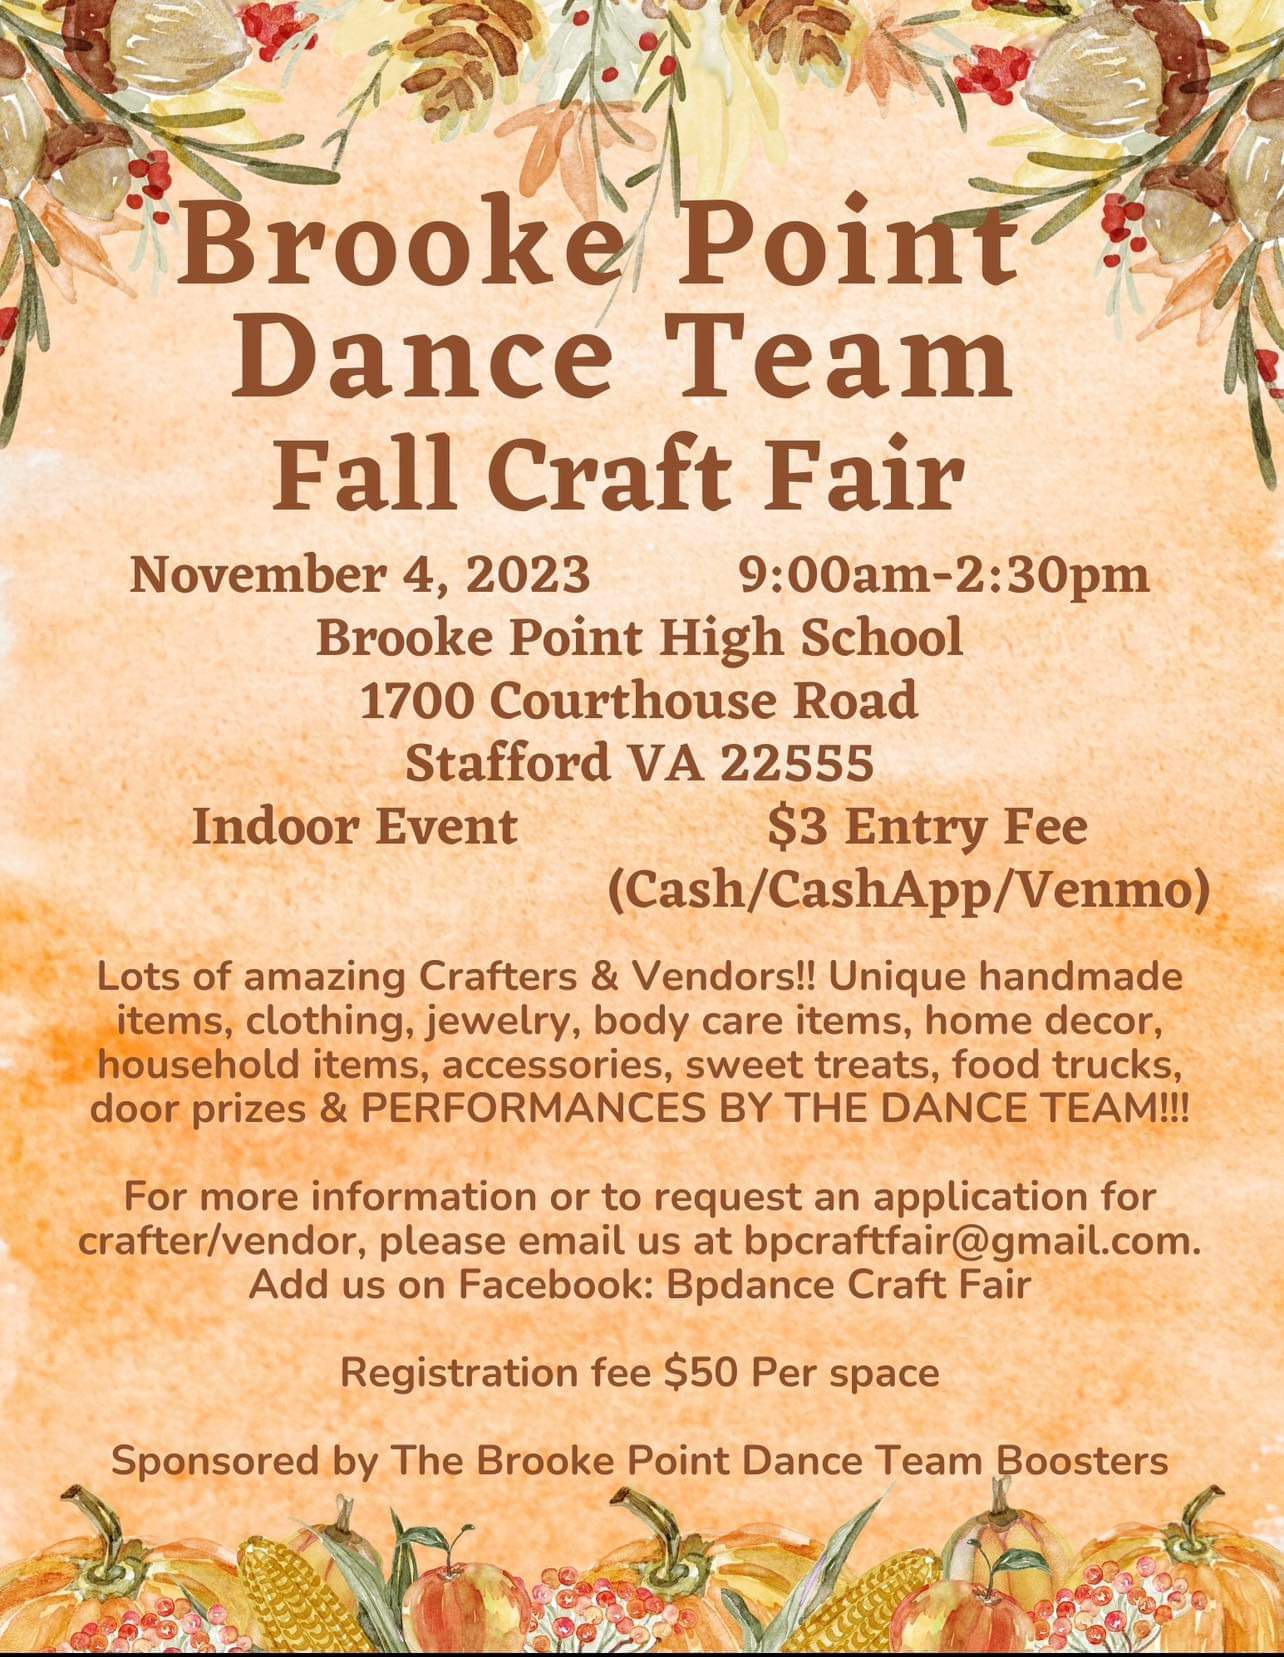 <h1 class="tribe-events-single-event-title">Brooke Point Dance Team Fall Craft Fair</h1>